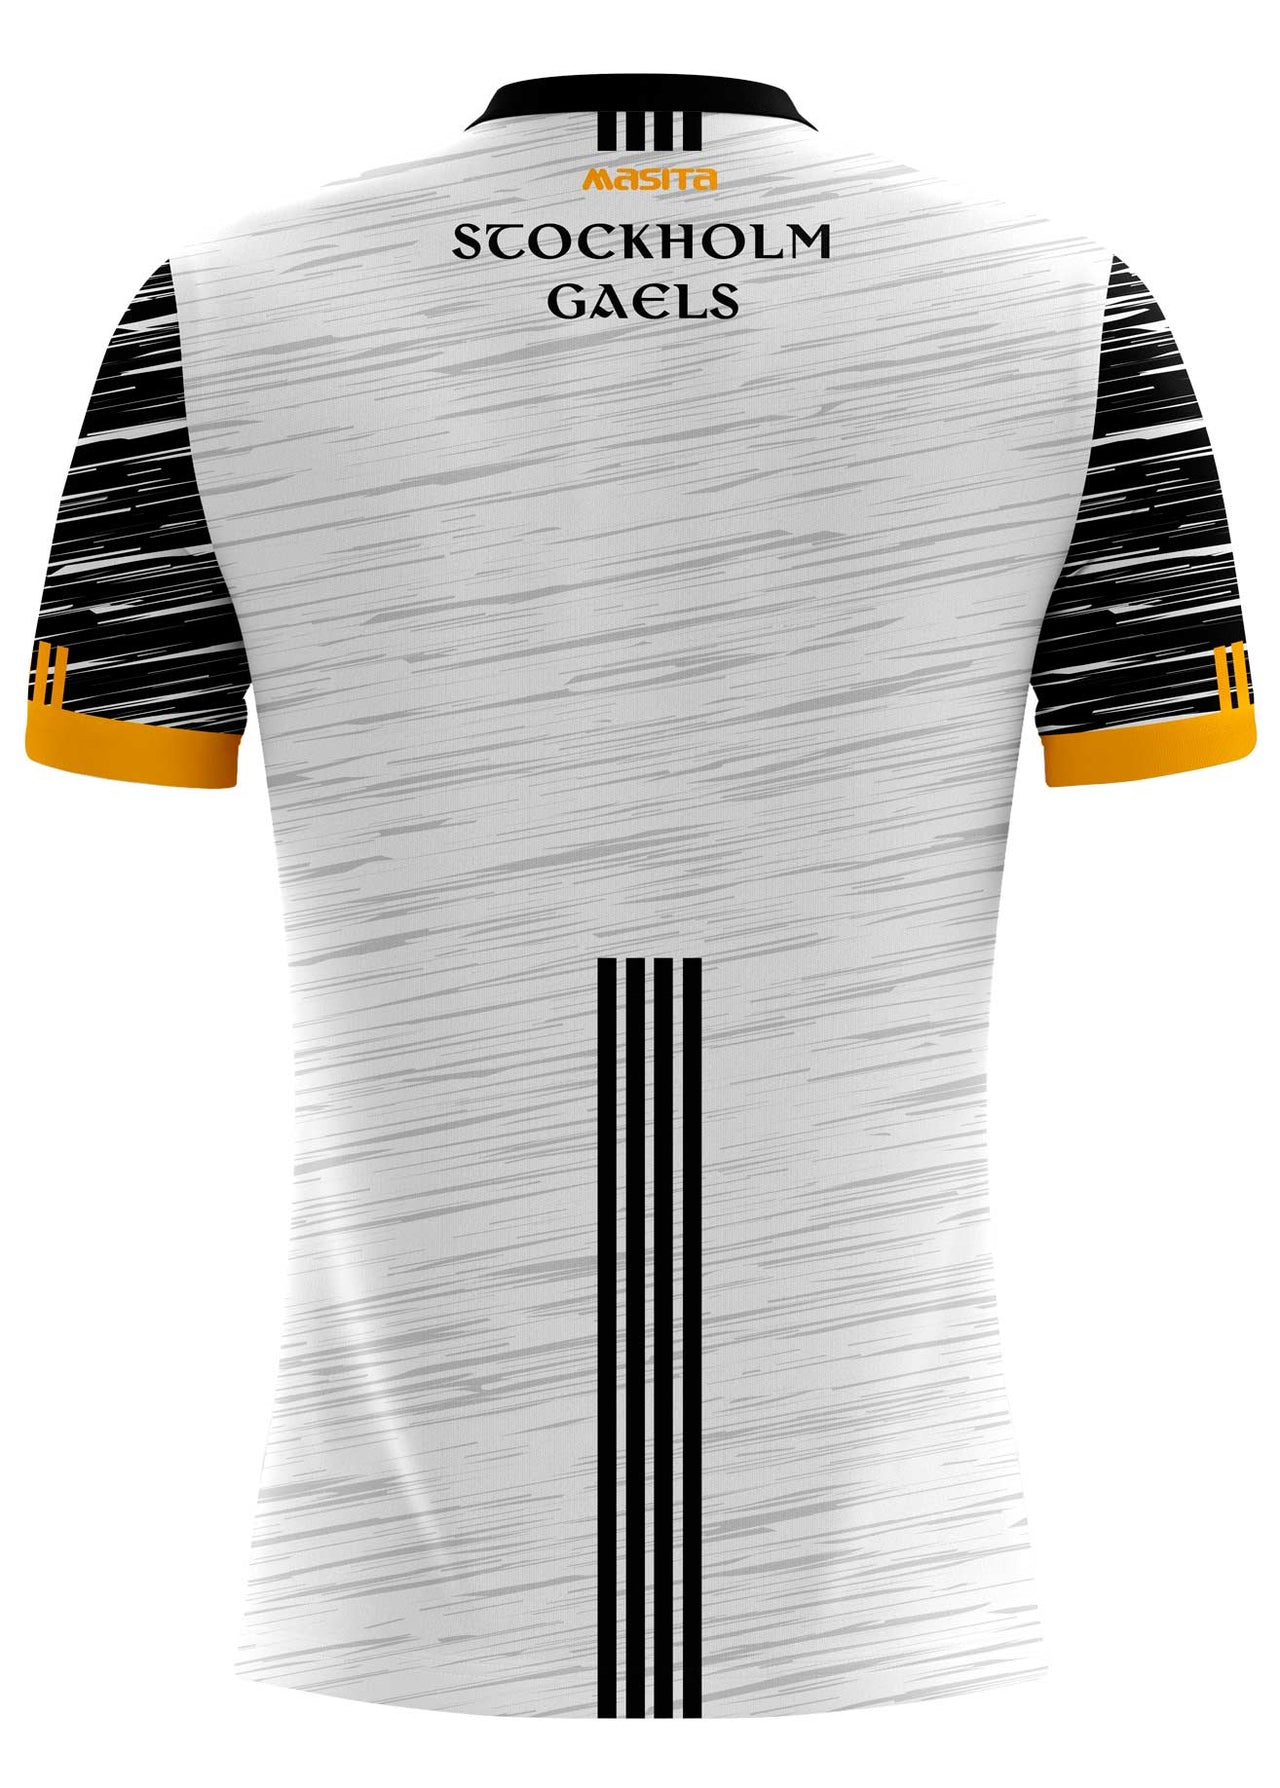 Stockholm Gaels Training Jersey Player Fit Adult